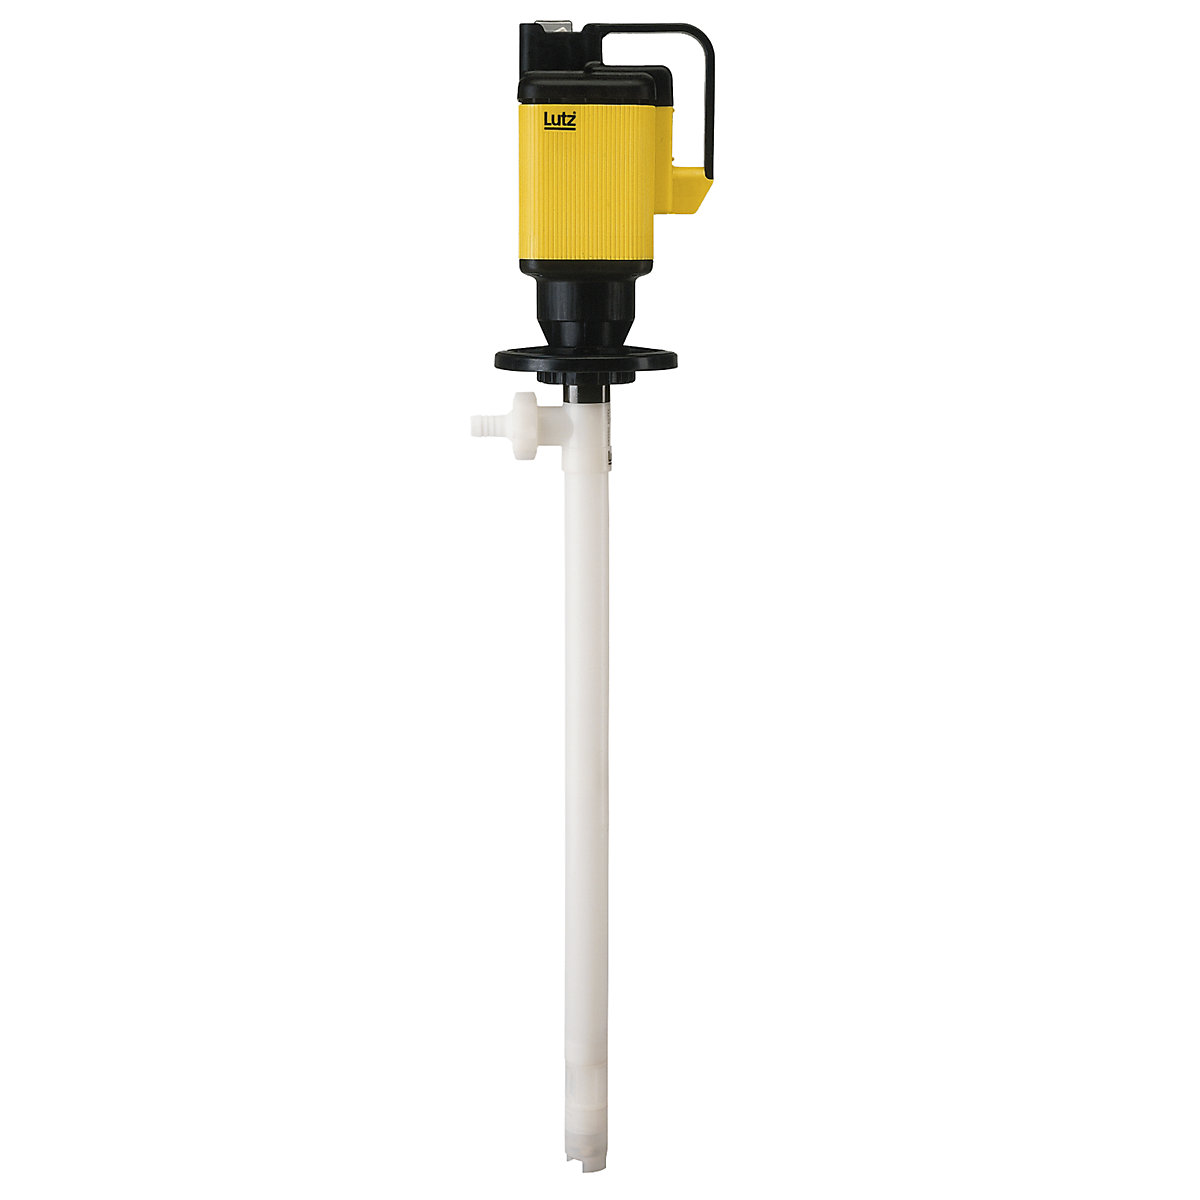 Electric tank container pump – Lutz